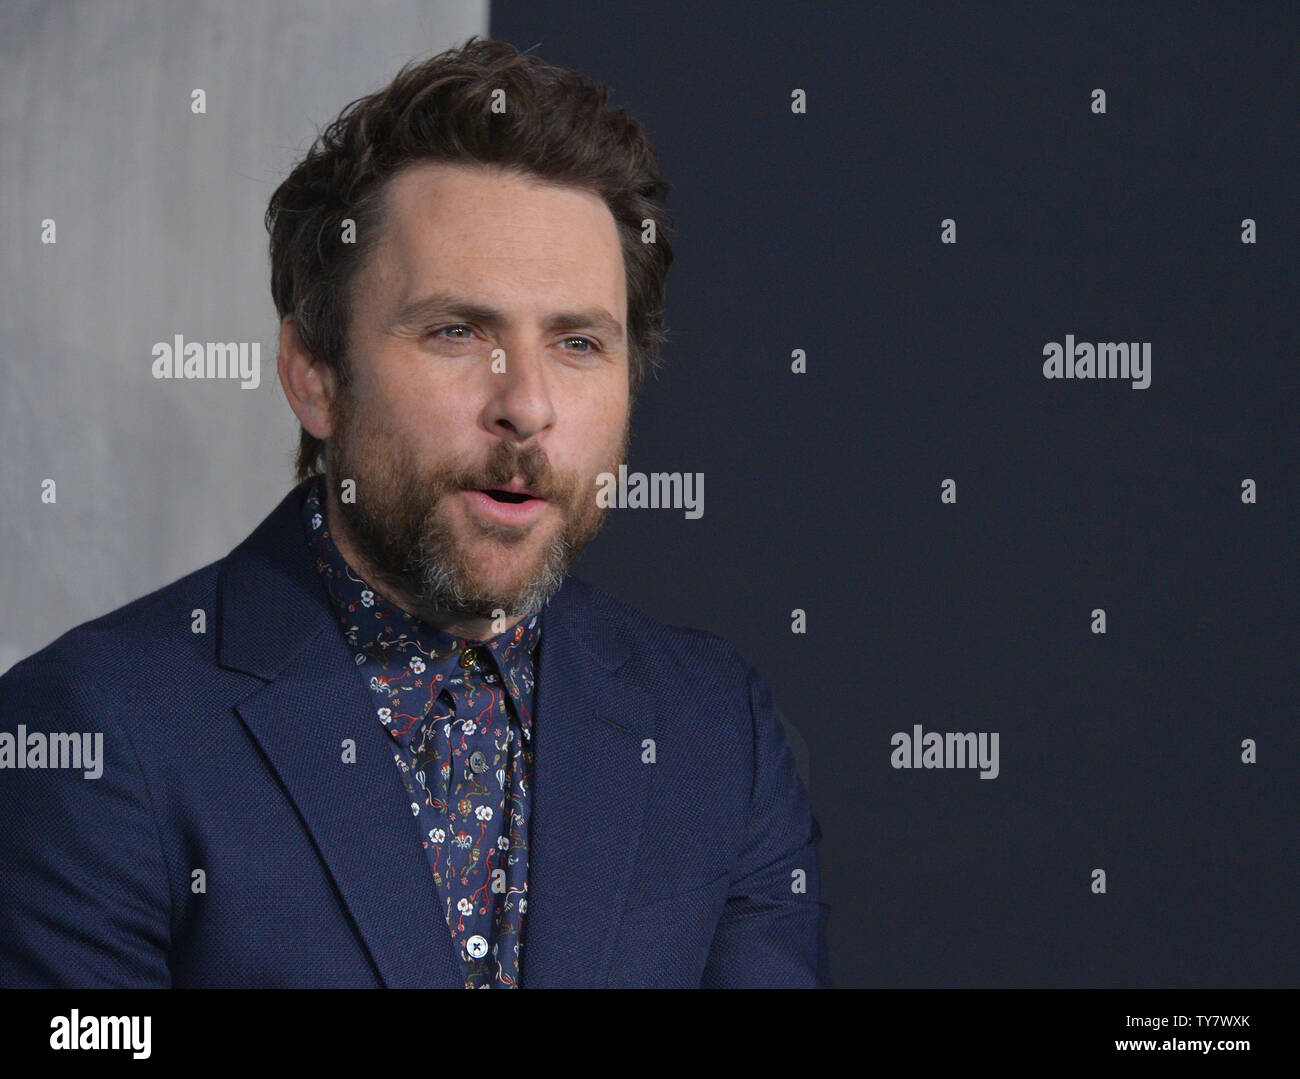 Cast member Charlie Day attends the premiere of the sci-fi motion picture  Pacific Rim Uprising at the TCL Chinese Theatre in the Hollywood section  of Los Angeles on March 21, 2018. Storyline